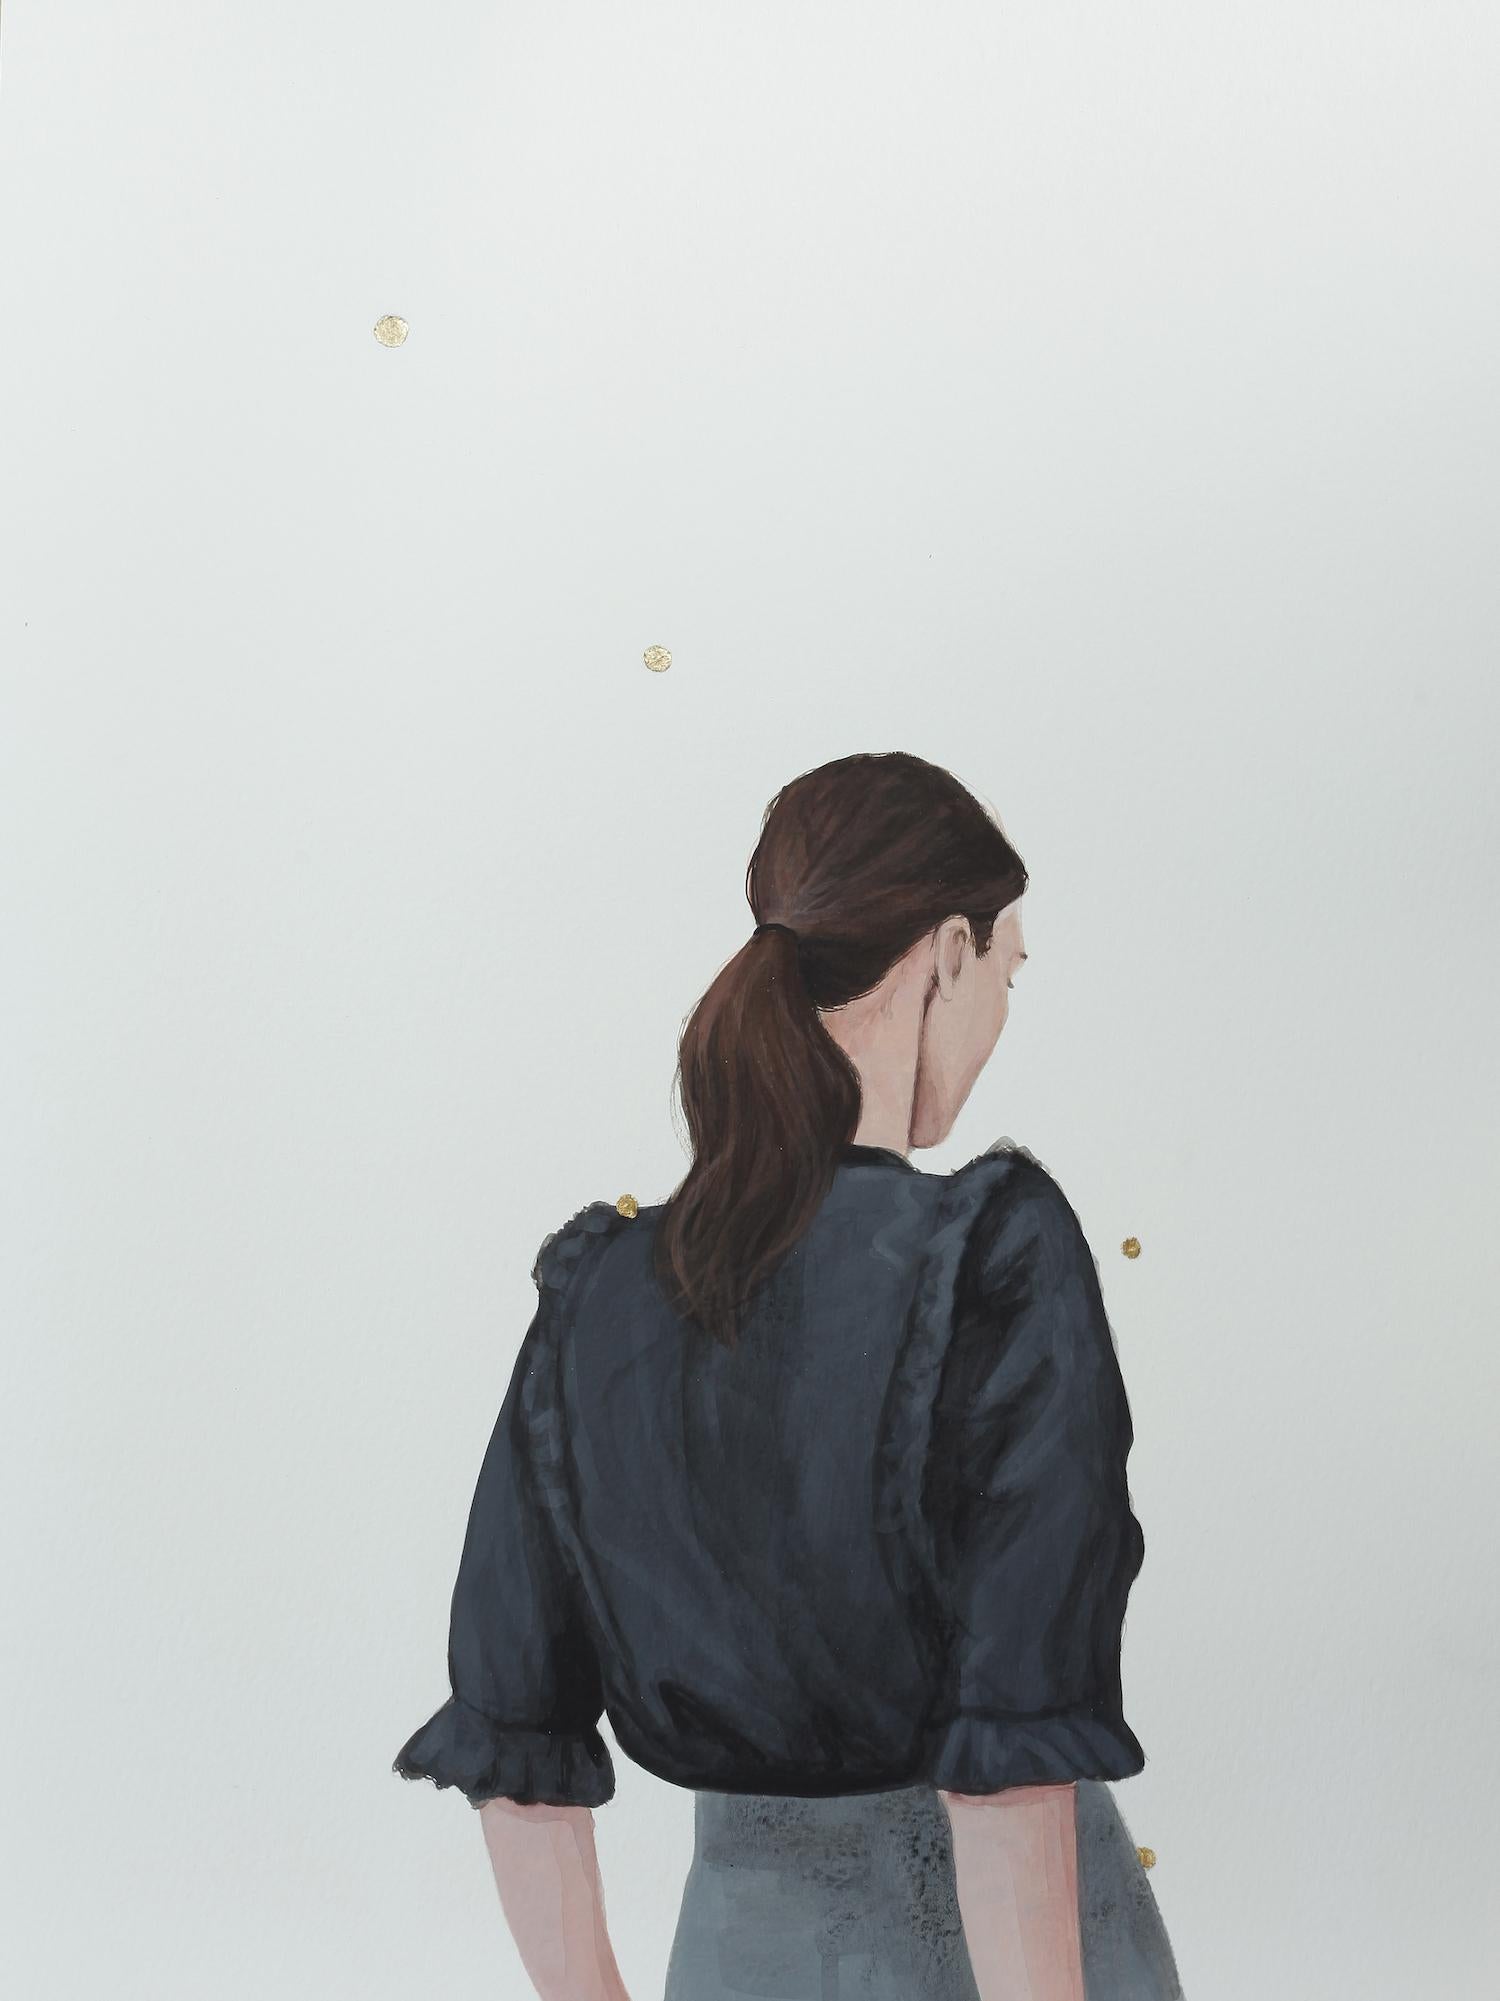 Karoline Kroiss Figurative Painting - "Golden Dots VII" Contemporary Portrait Painting of a Girl with Golden Dots